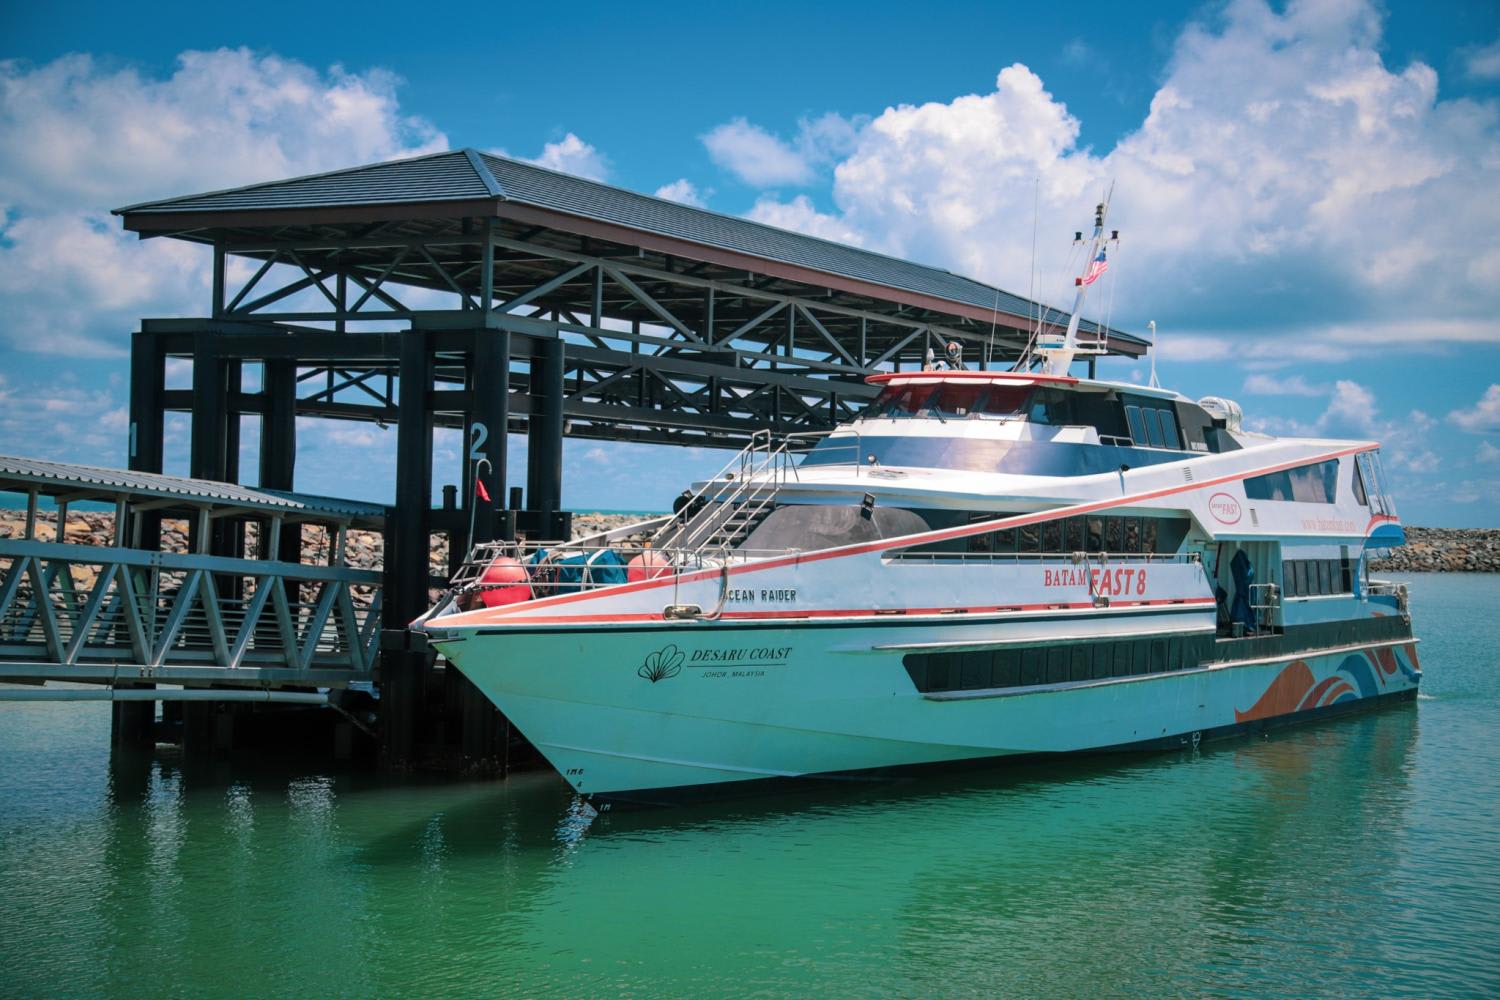 Singapore-Desaru ferry services to begin operating on July 7, tickets on sale starting June 30